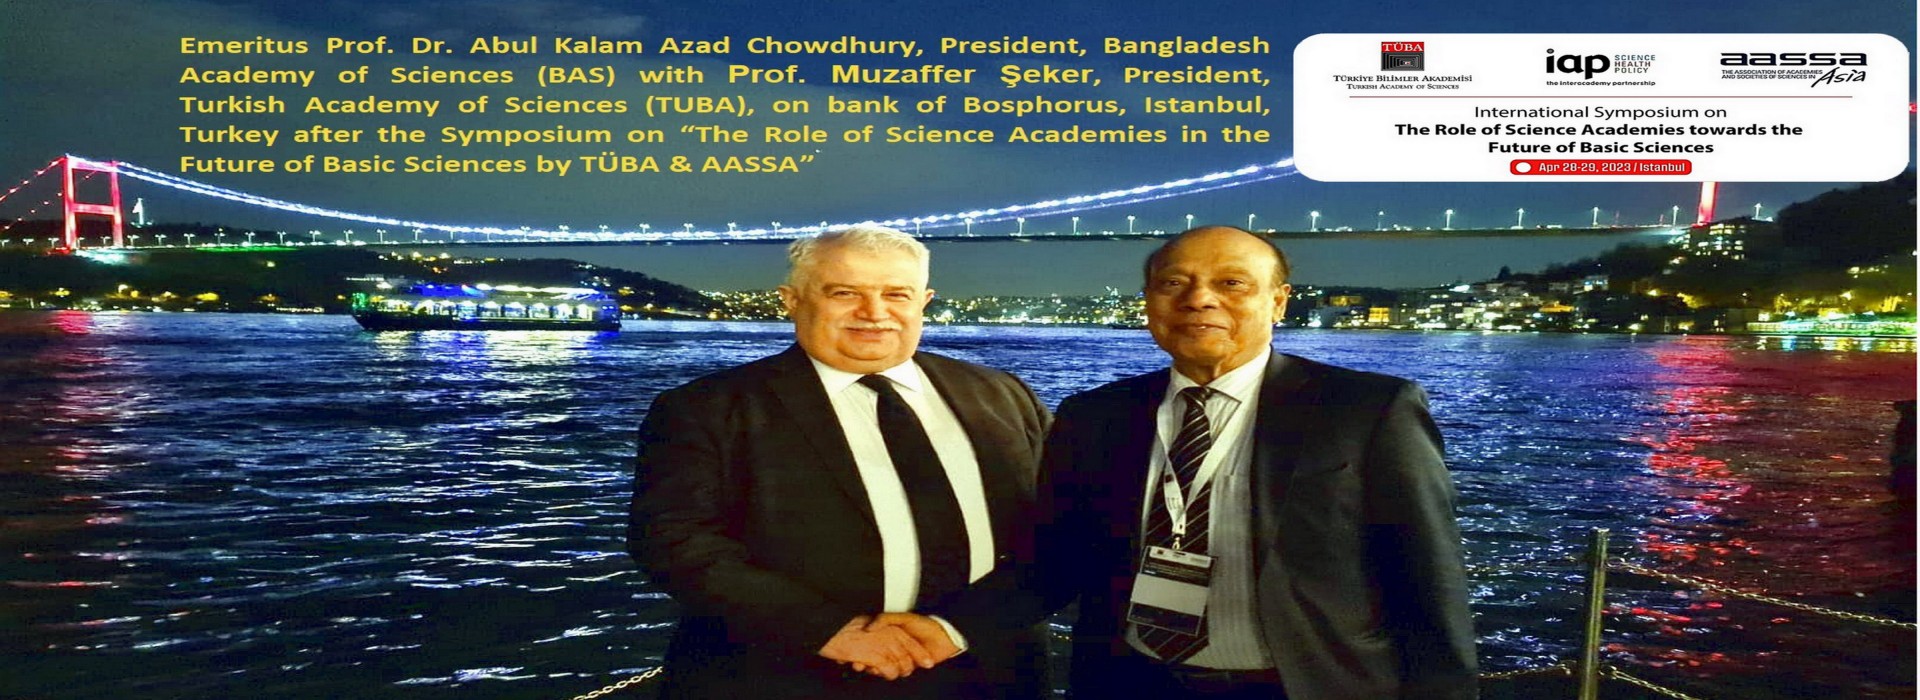 Emeritus Prof. Dr. Abul Kalam Azad Chowdhury, President, Bangladesh Academy of Sciences (BAS) with Prof. Muzaffer ?eker, President, Turkish Academy of Sciences (TUBA), on bank of Bosphorus, Istanbul, Turkey after the Symposium on “The Role of Science Academies in the Future of Basic Sciences by TÜBA & AASSA”